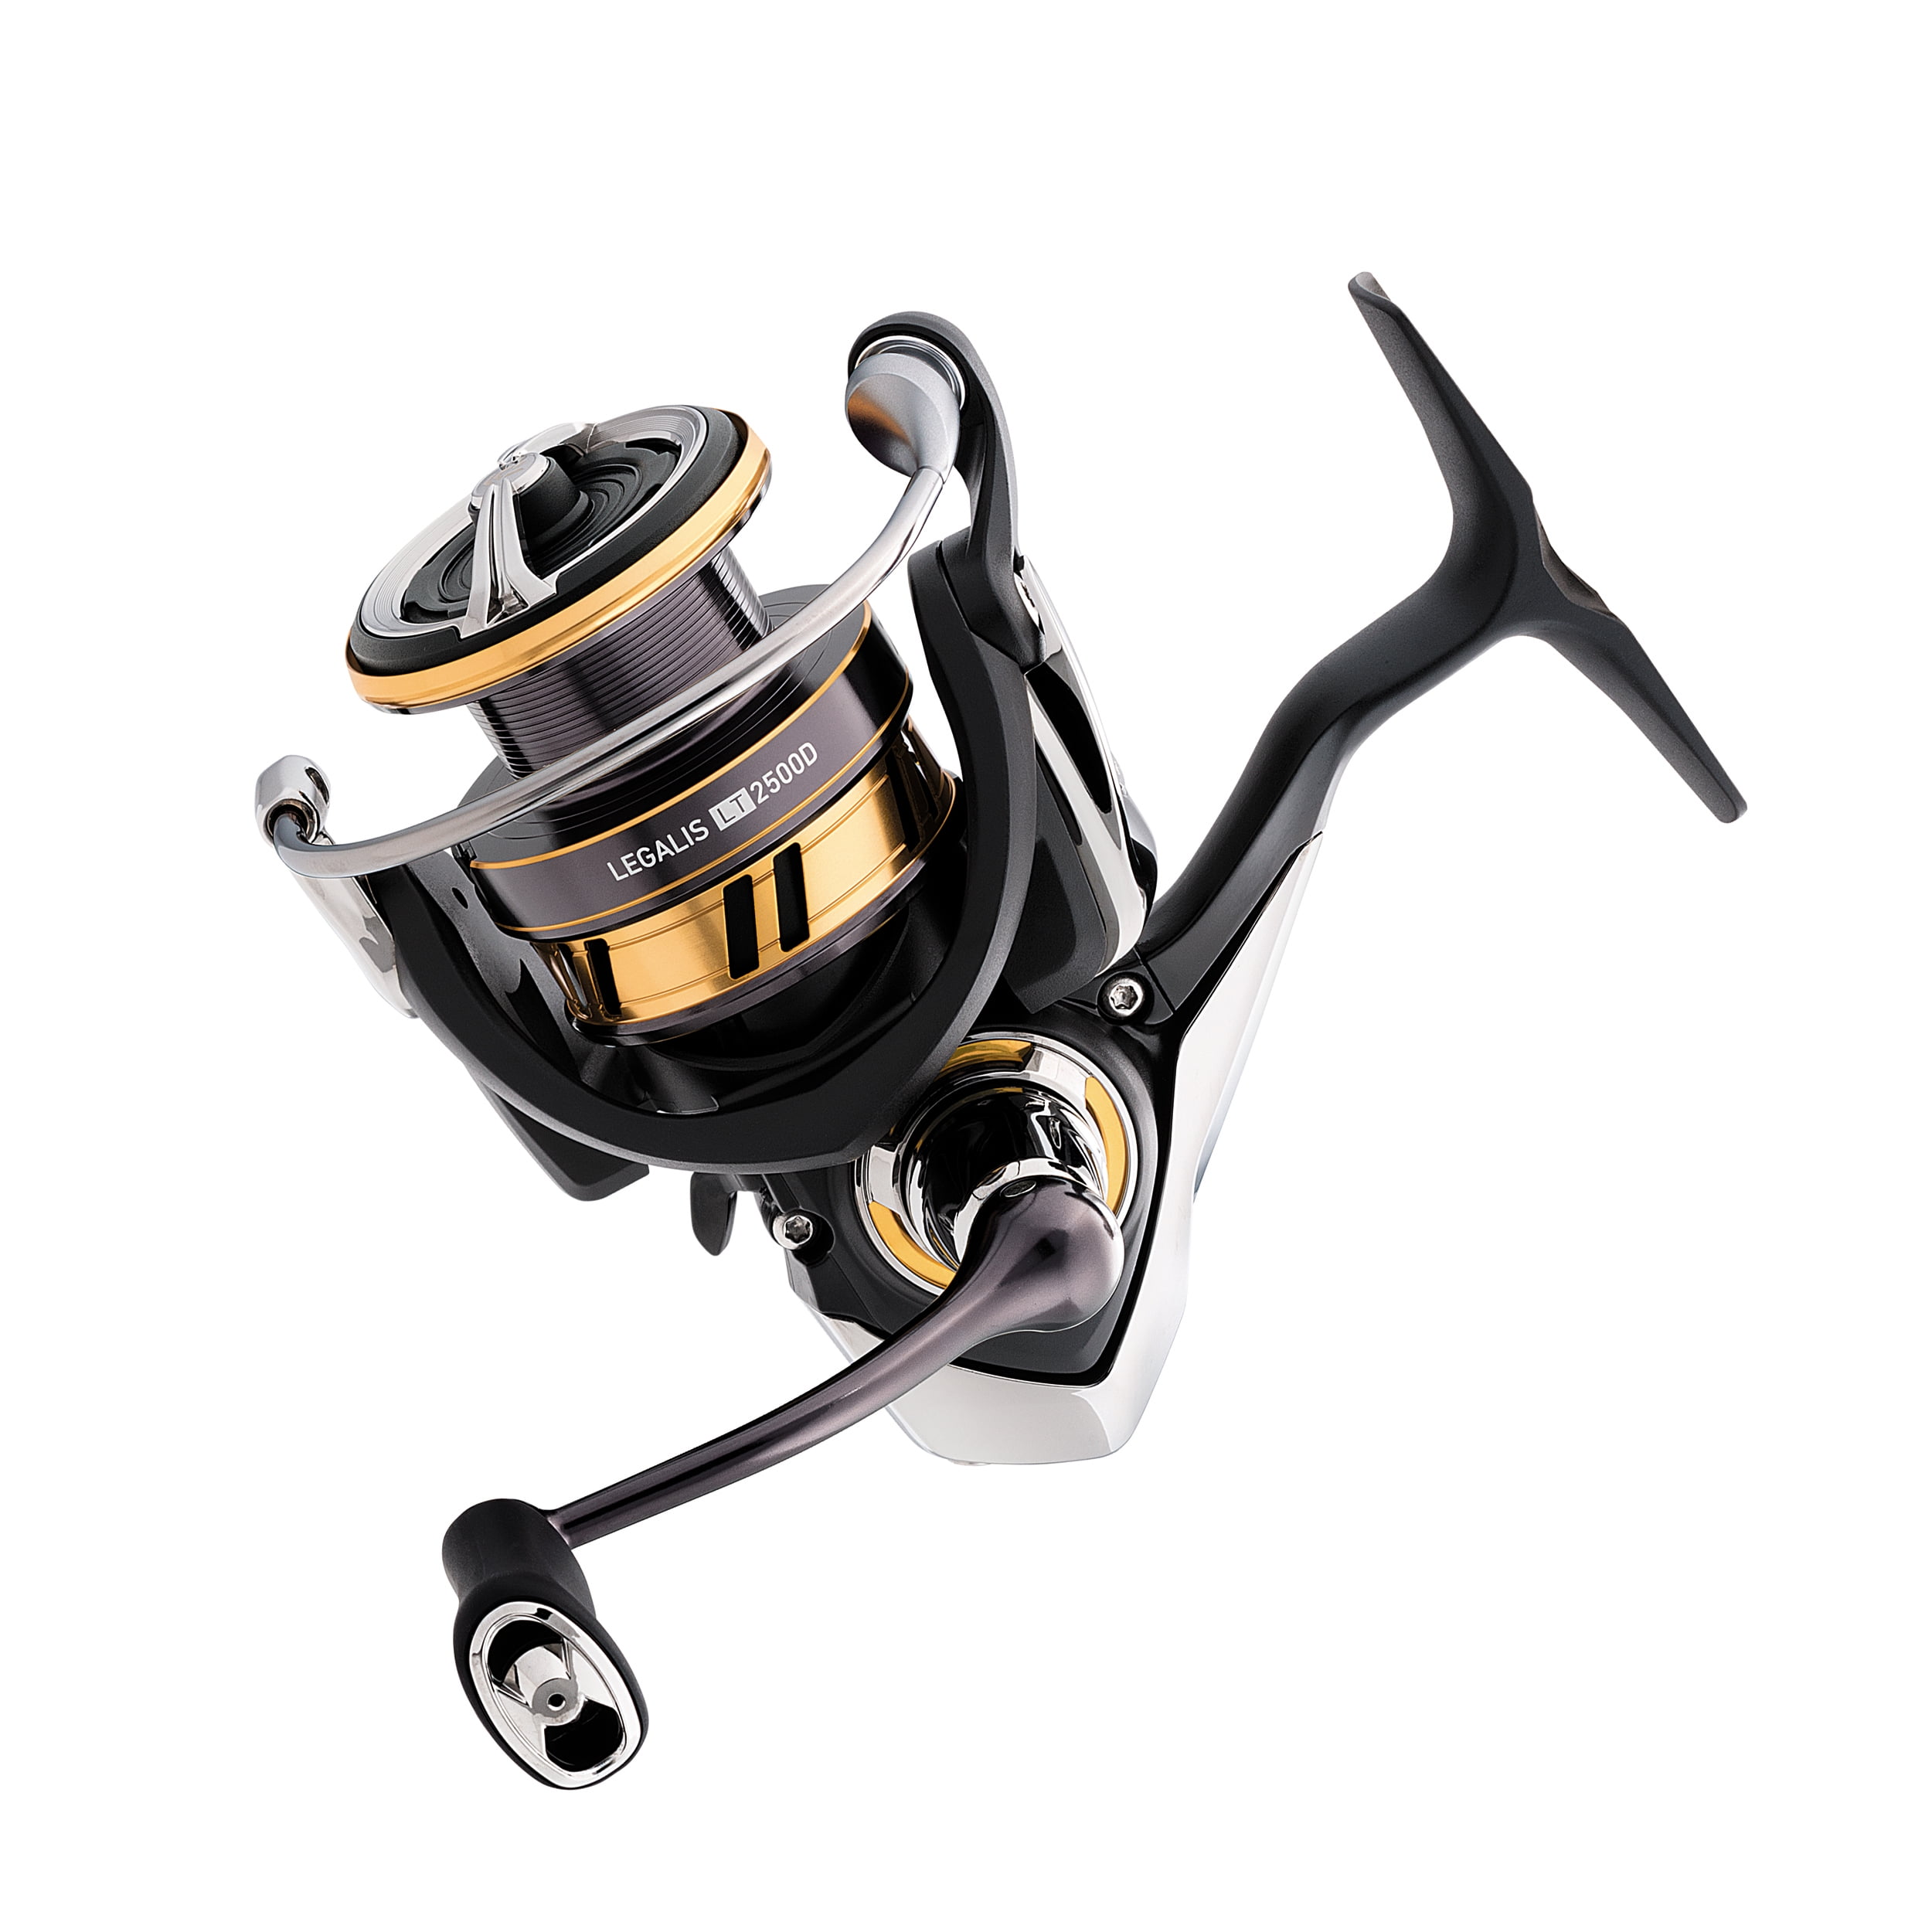 DAIWA Ninja LT, 2500D, left and right hand, Spinning Fishing Reel, Front  Drag, signs of use, without packaging